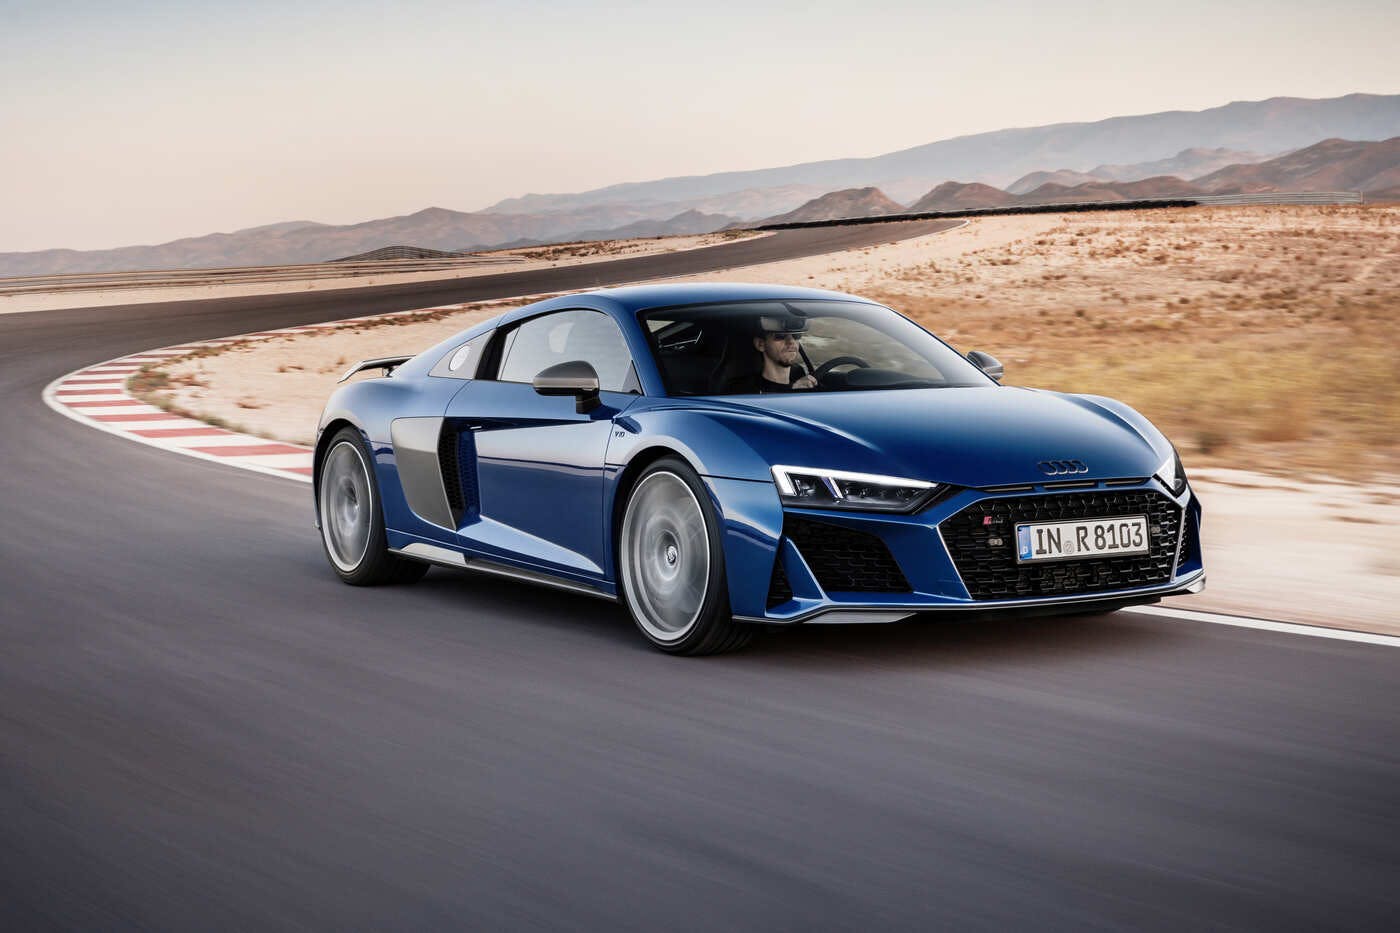 2020 Audi R8 Review, Pricing, & Pictures